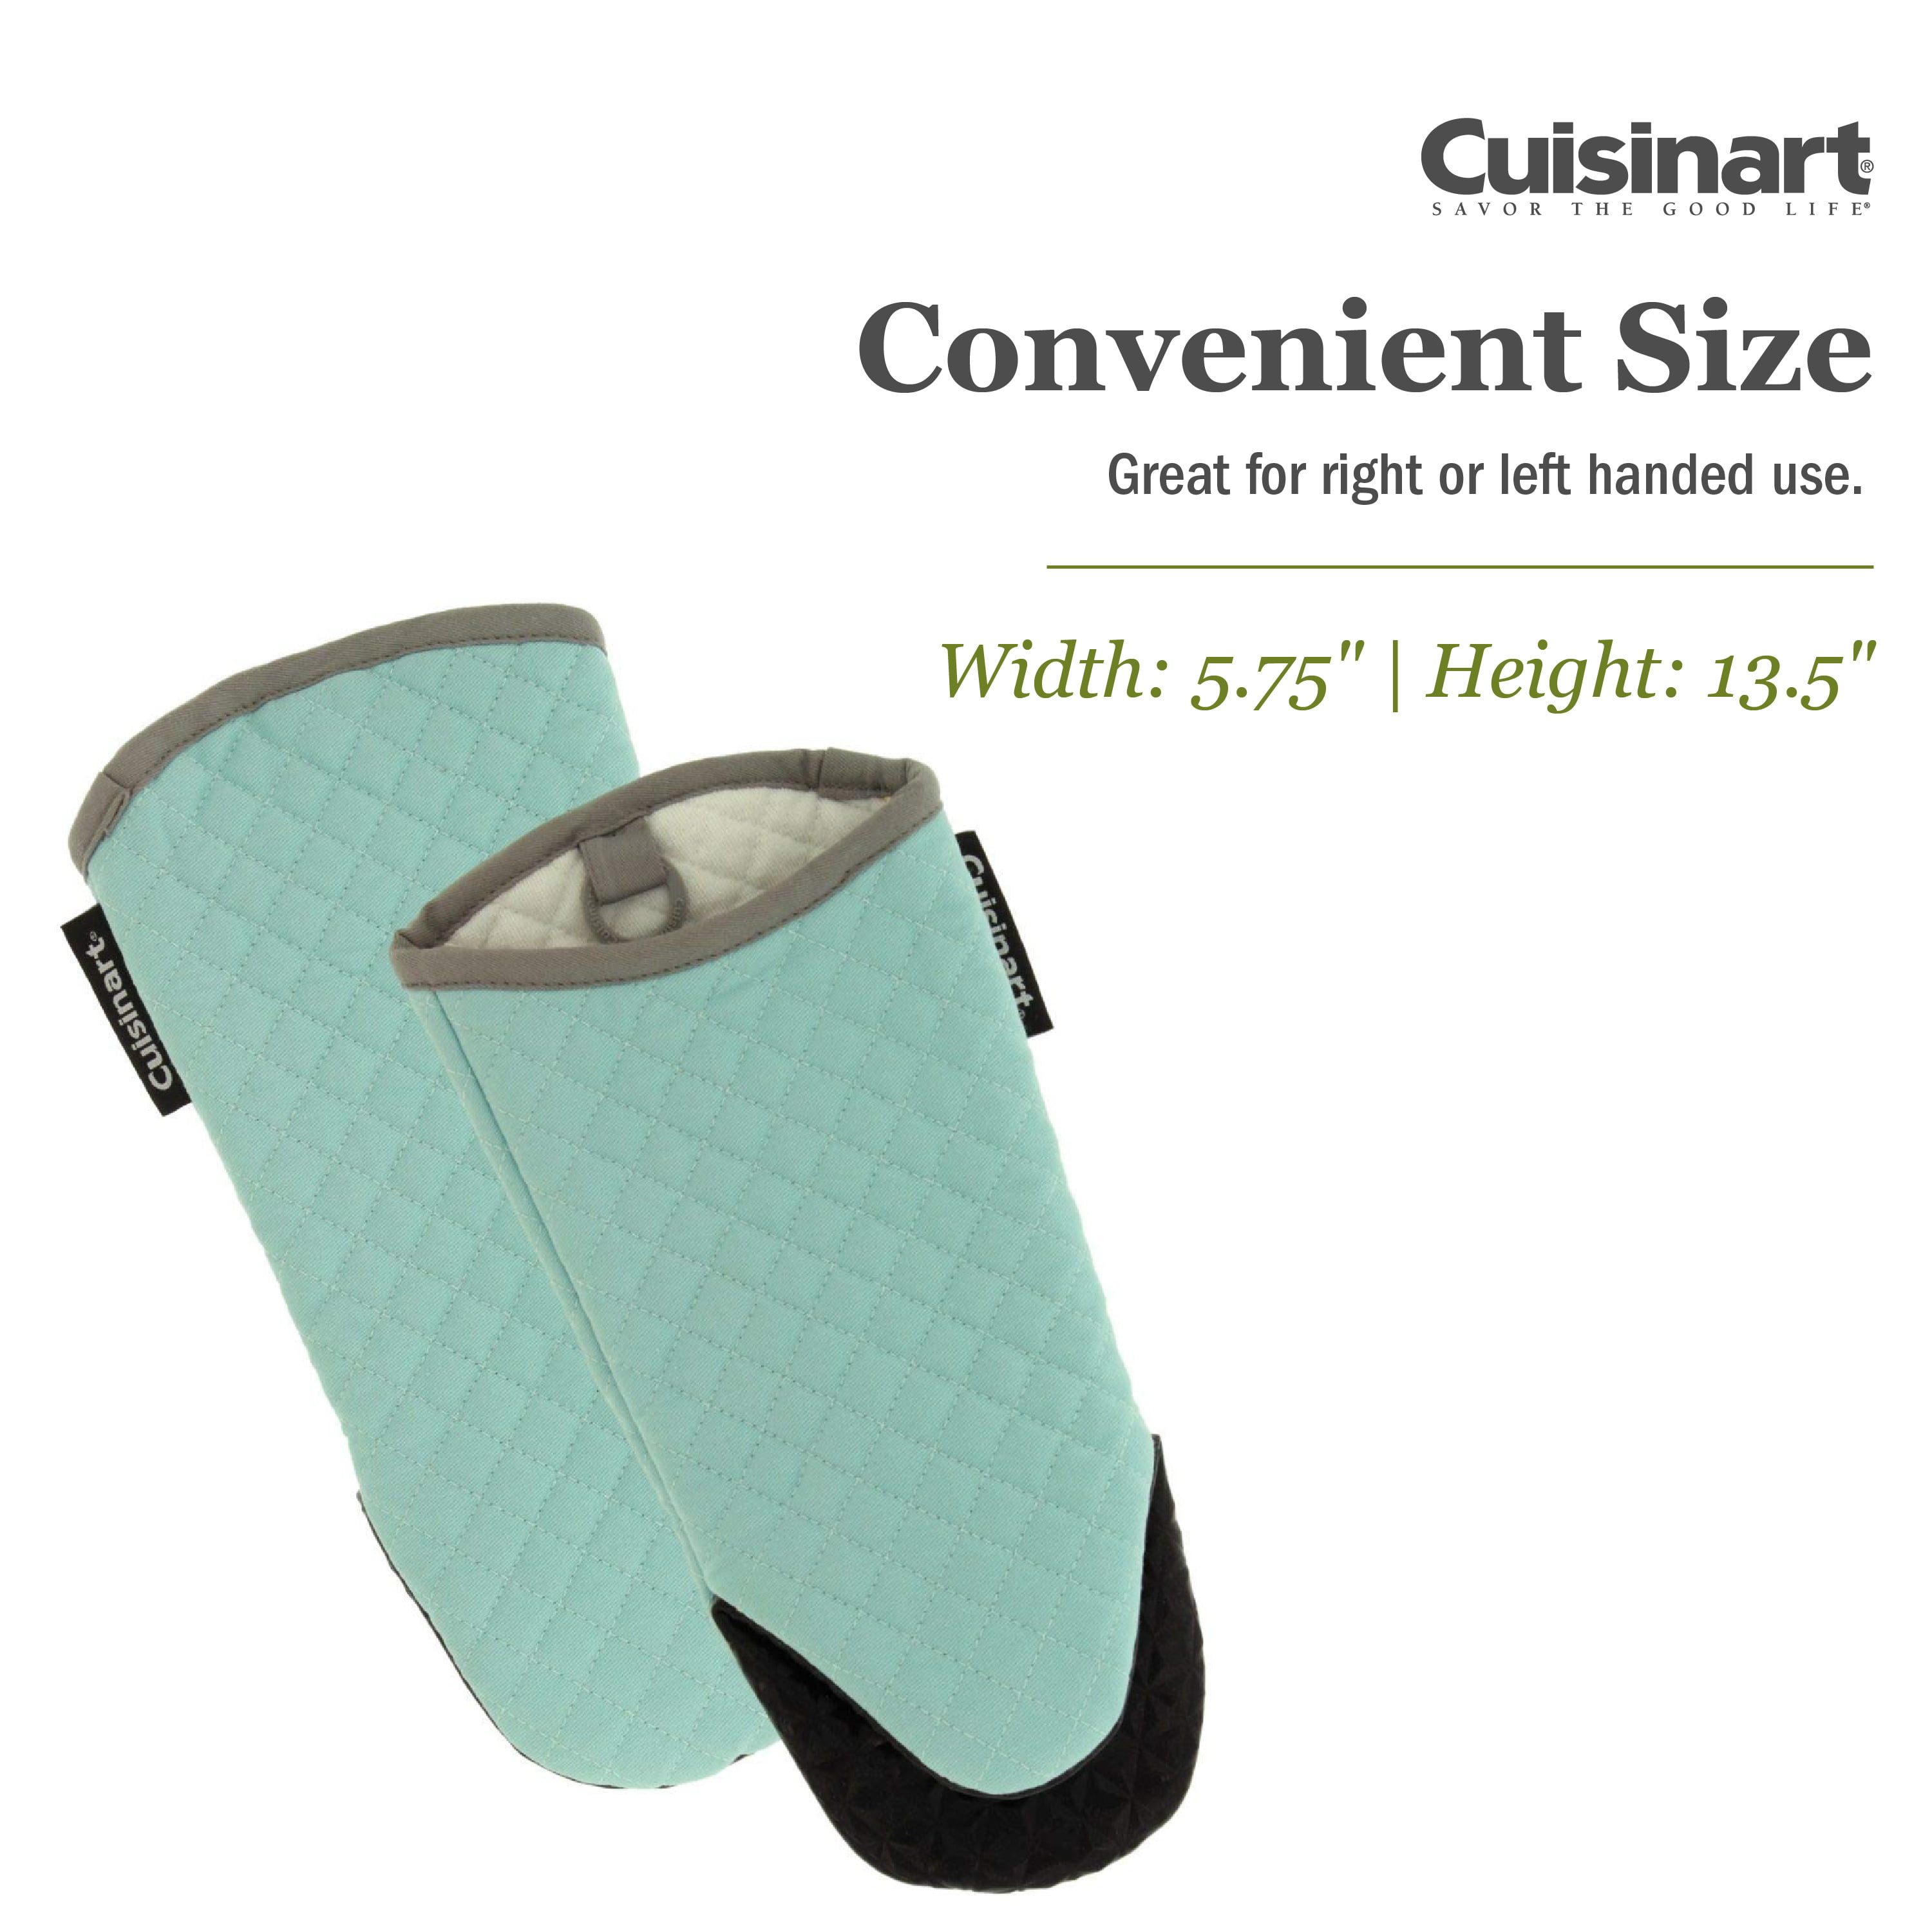 Cuisinart Silicone Oval Pot Holders and Oven Mitts - Heat Resistant, Handle  Hot Oven/Cooking Items Safely - Soft Insulated Pockets, Non-Slip Grip and